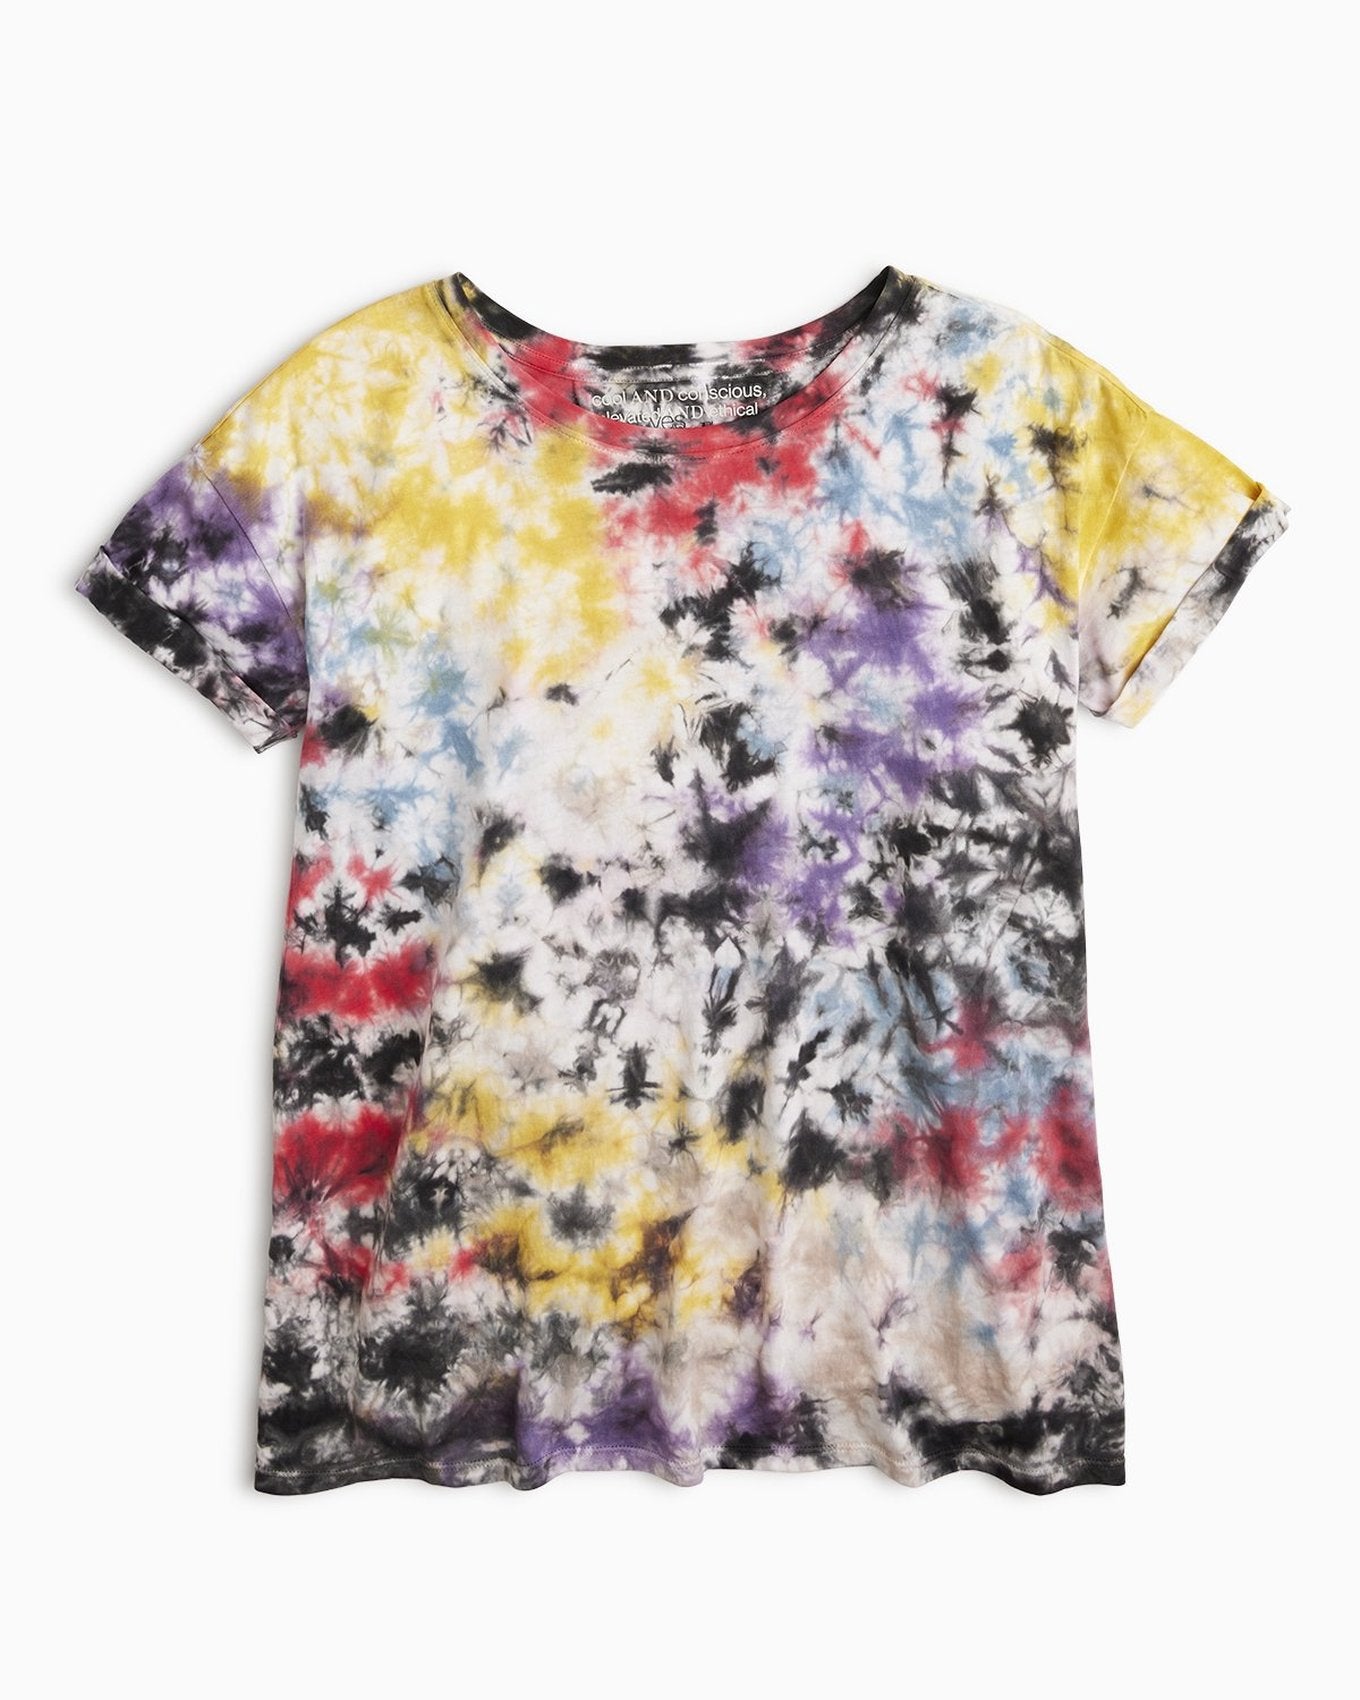 YesAnd Organic Tie Dye Rolled Short Sleeve T-Shirt T-Shirt in color Splatter Tie Dye C02 and shape t-shirt